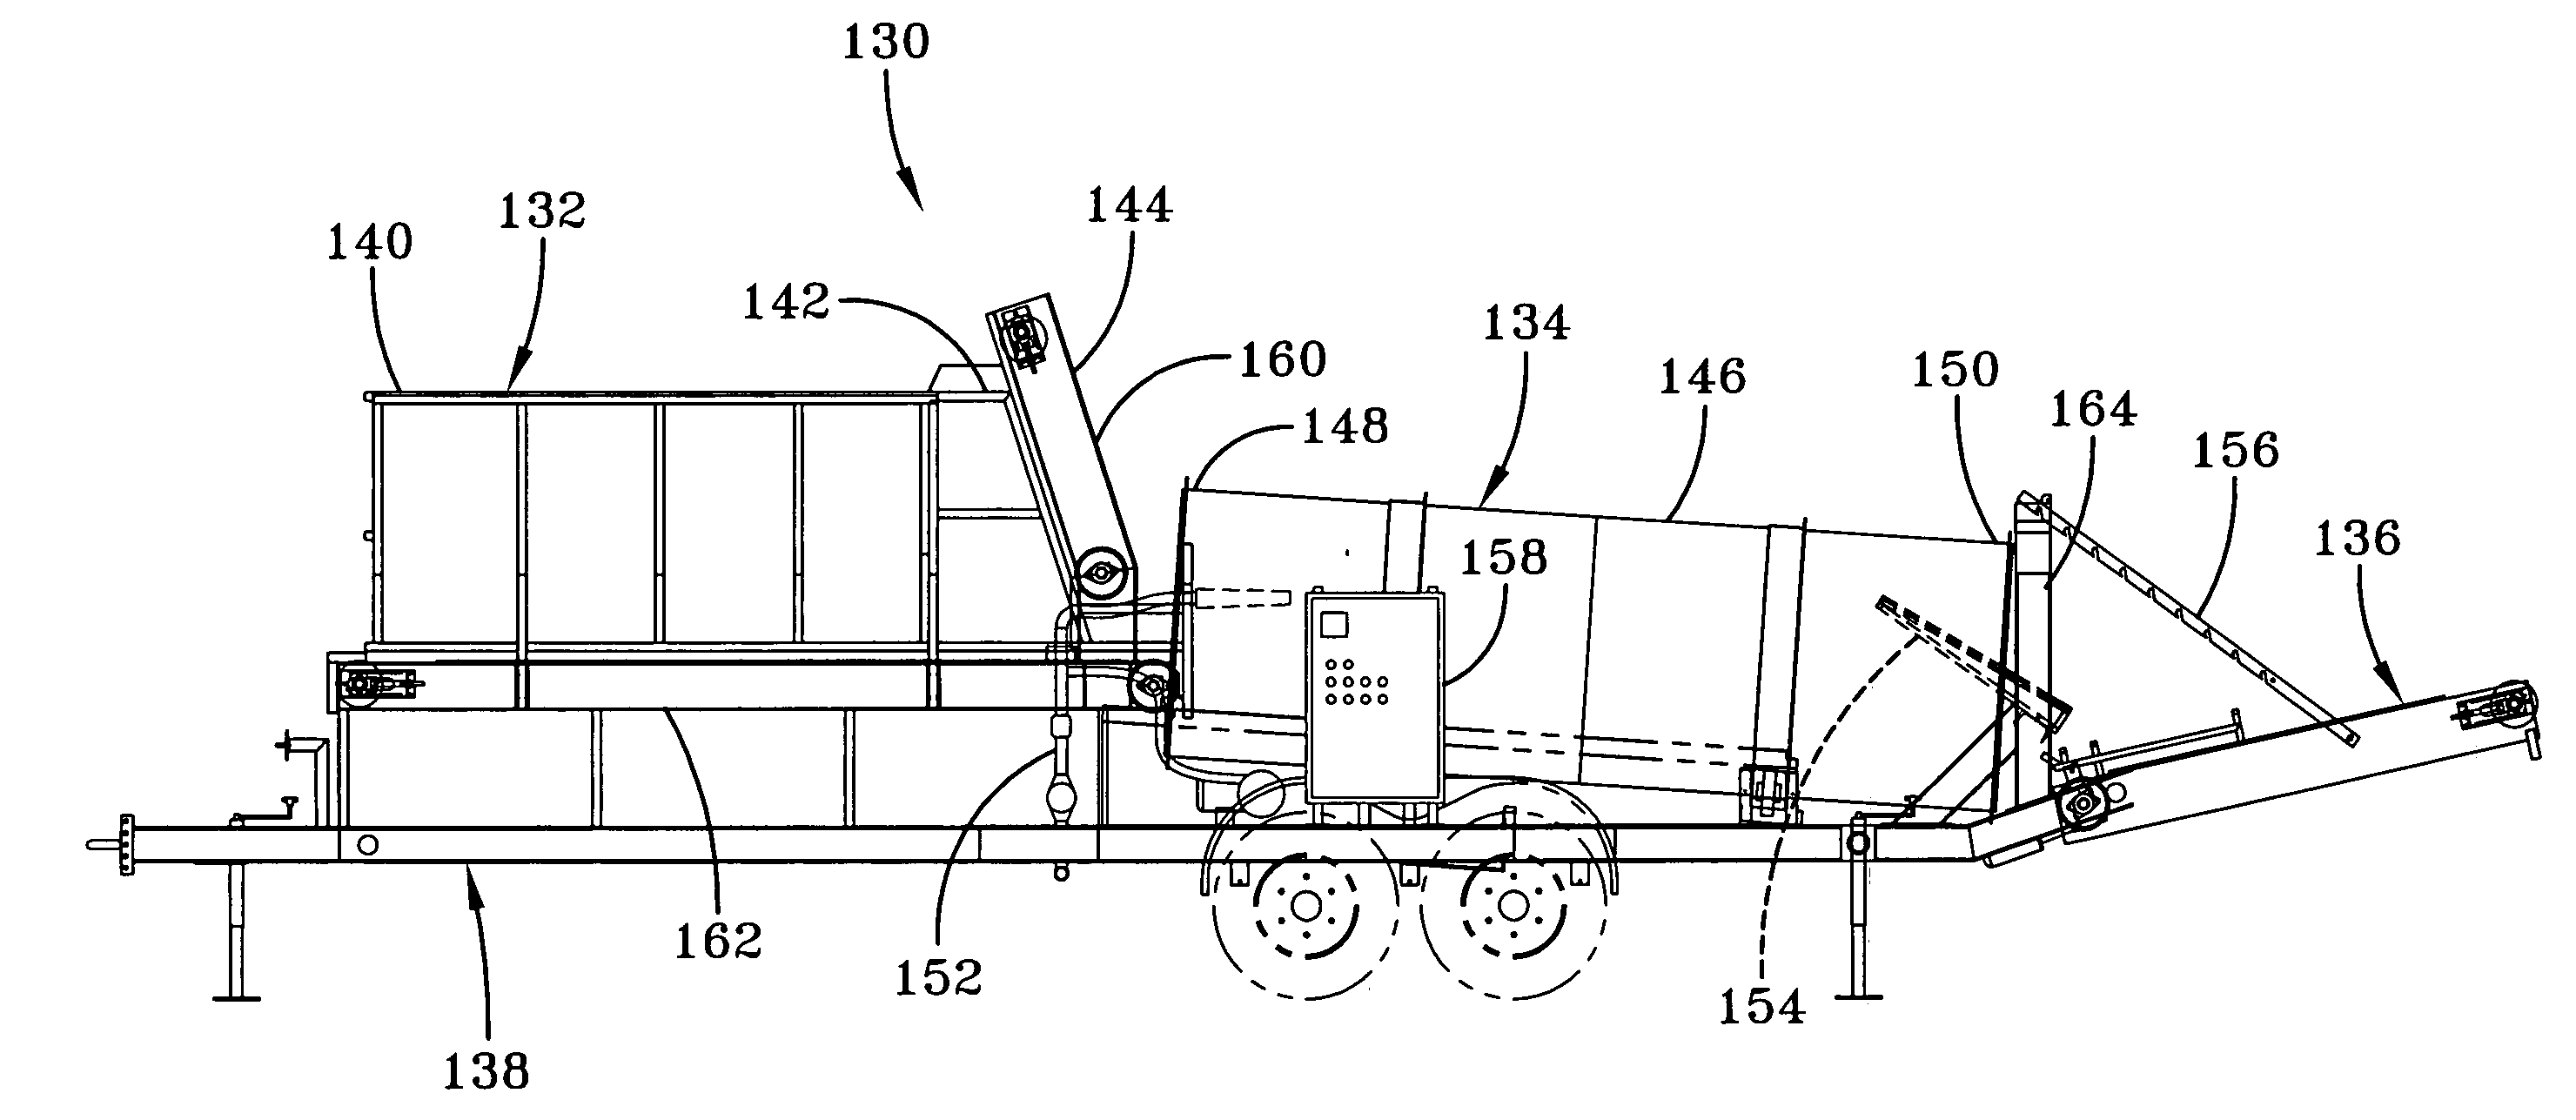 Apparatus and method for coloring landscape material